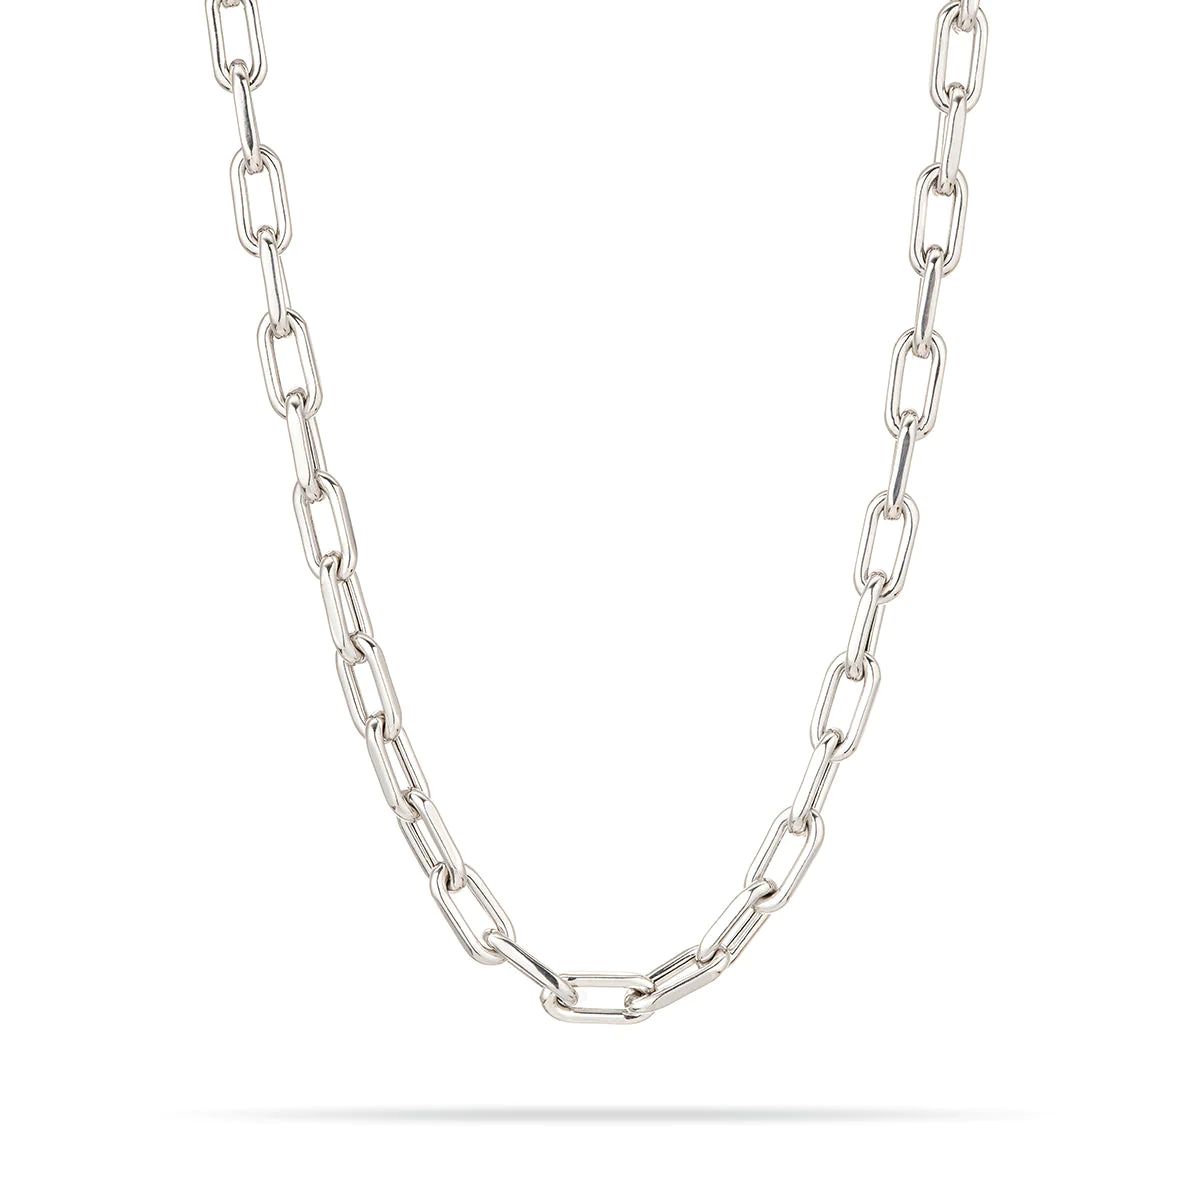 5.3mm Italian Chain Link Necklace in Sterling Silver | Adina Reyter